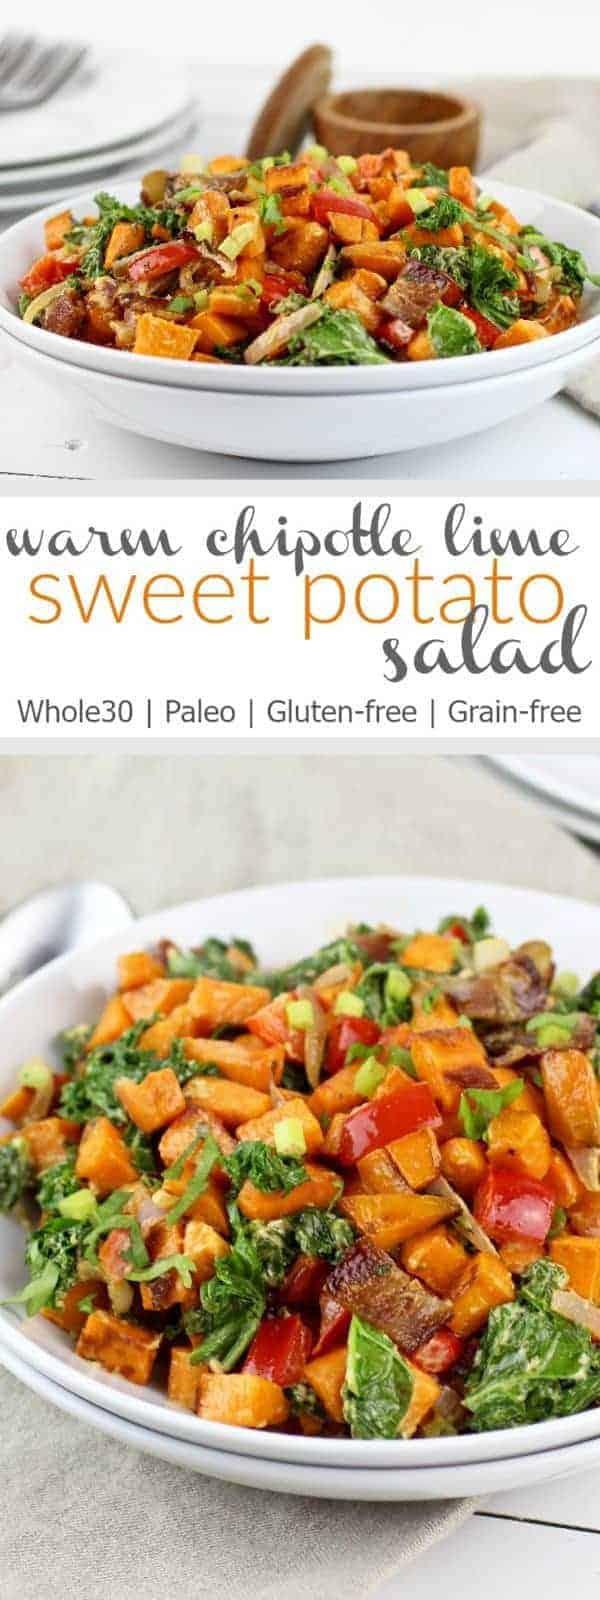 Warm Chipotle Lime Sweet Potato Salad - The Real Food Dietitians